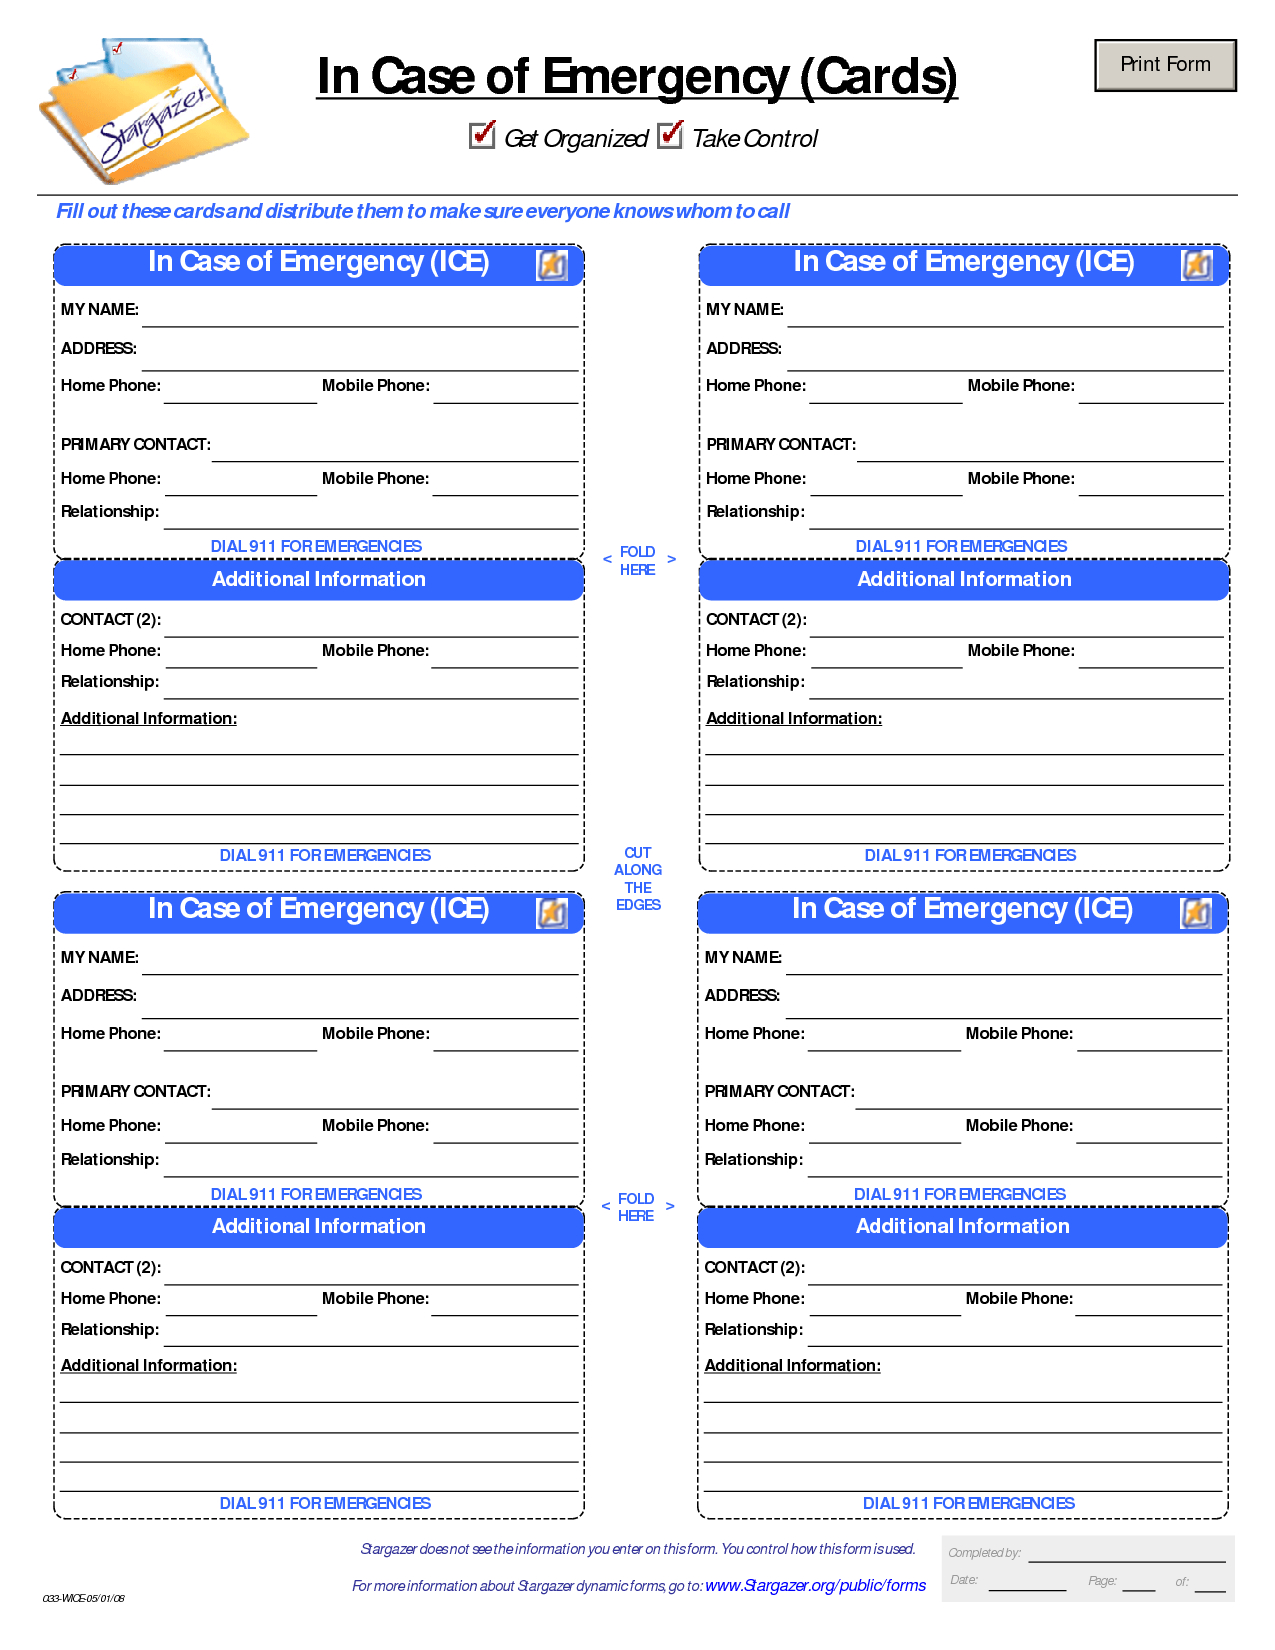 Pinlola Gambino On College Tips | Id Card Template, In Case Of - Free Printable Contact Forms